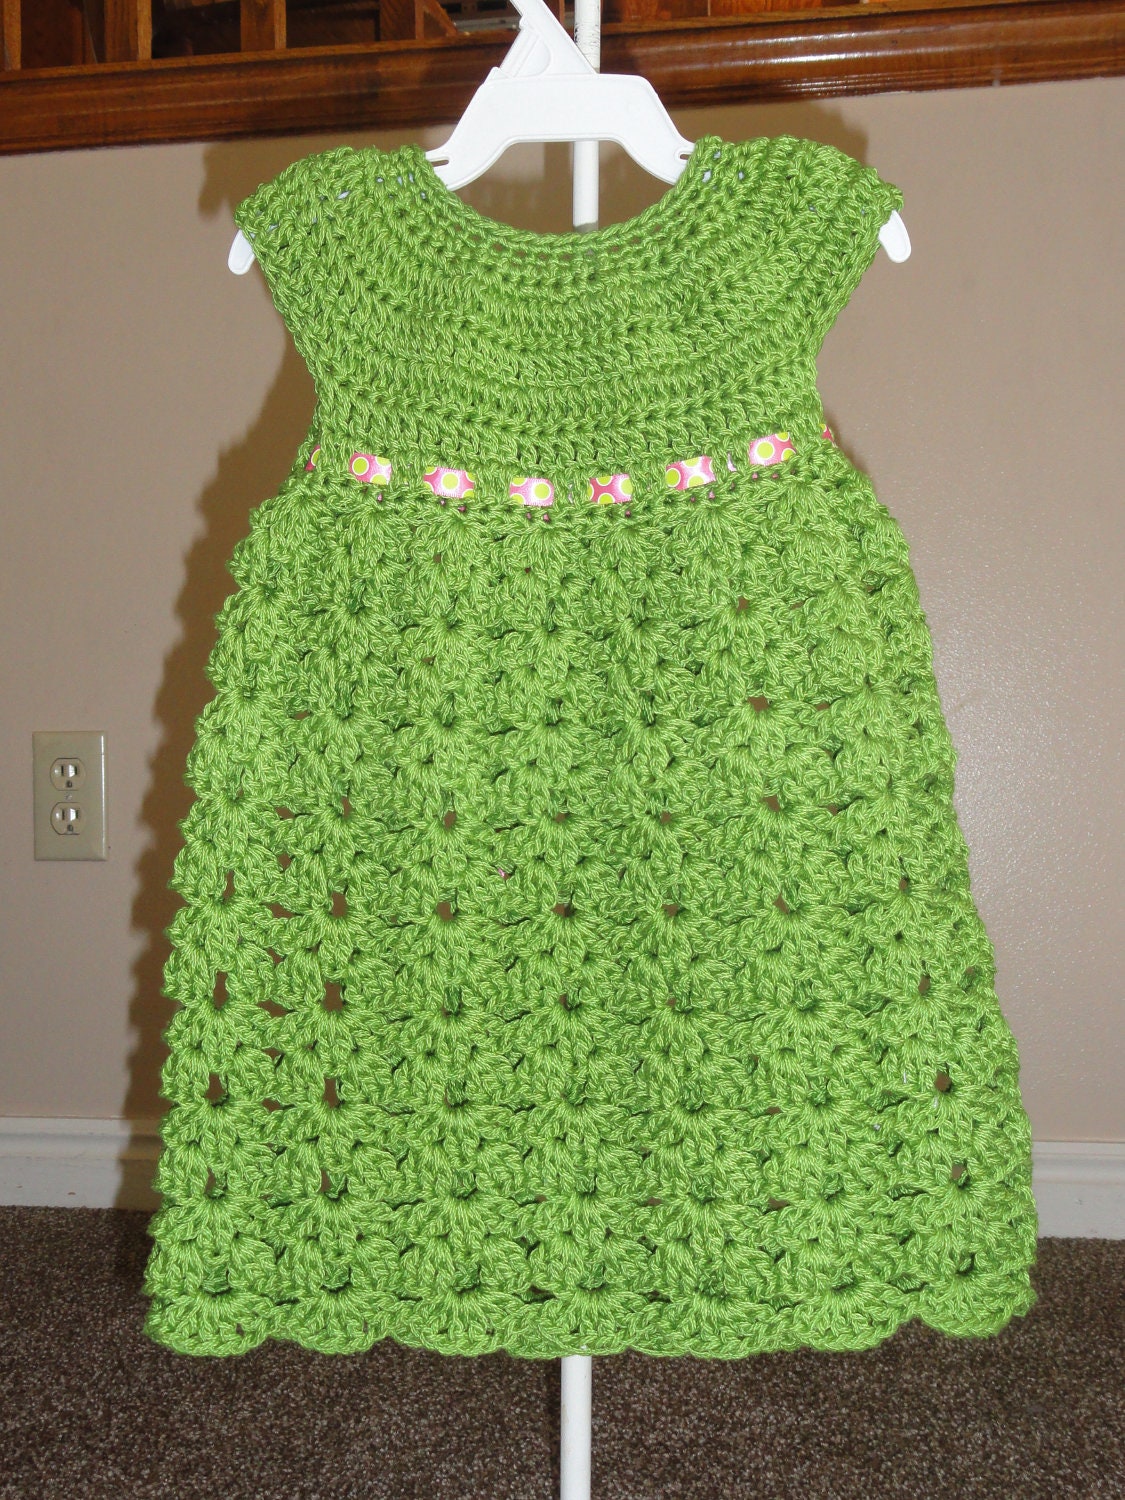 Fun and Easy Kaylen Dress Crochet Pattern Sizes 12 Months, 2T and 3T